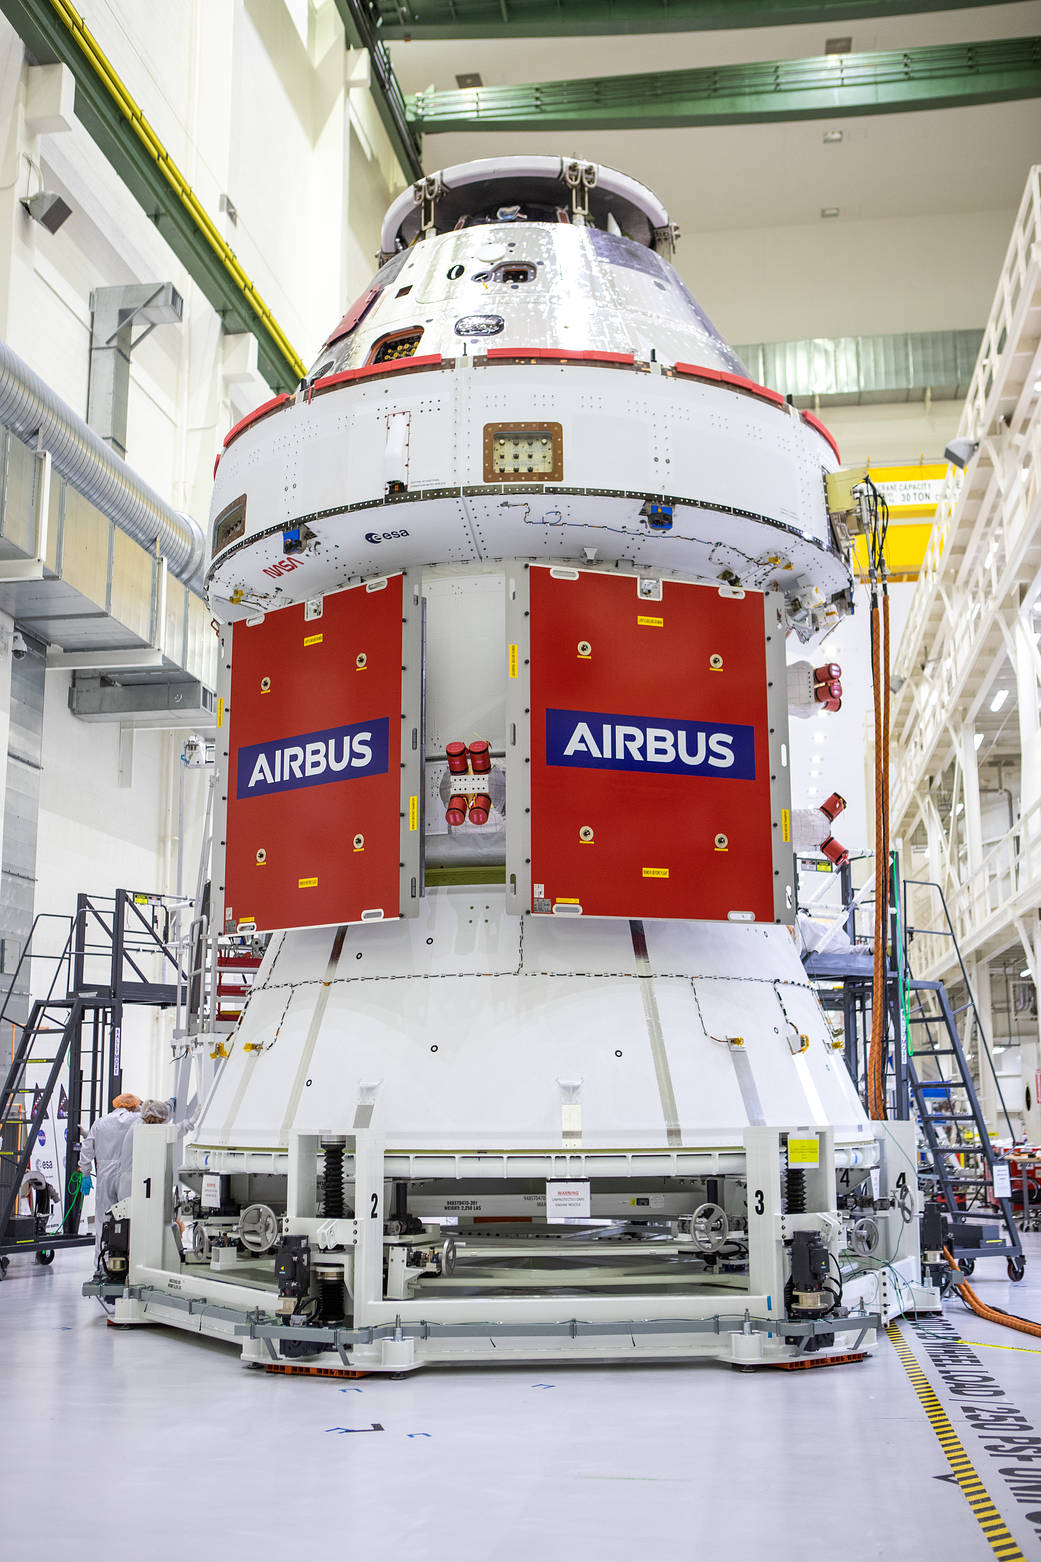 In view, protective covers have been placed over two solar array wings after installation was completed on the Orion spacecraft for Artemis I.